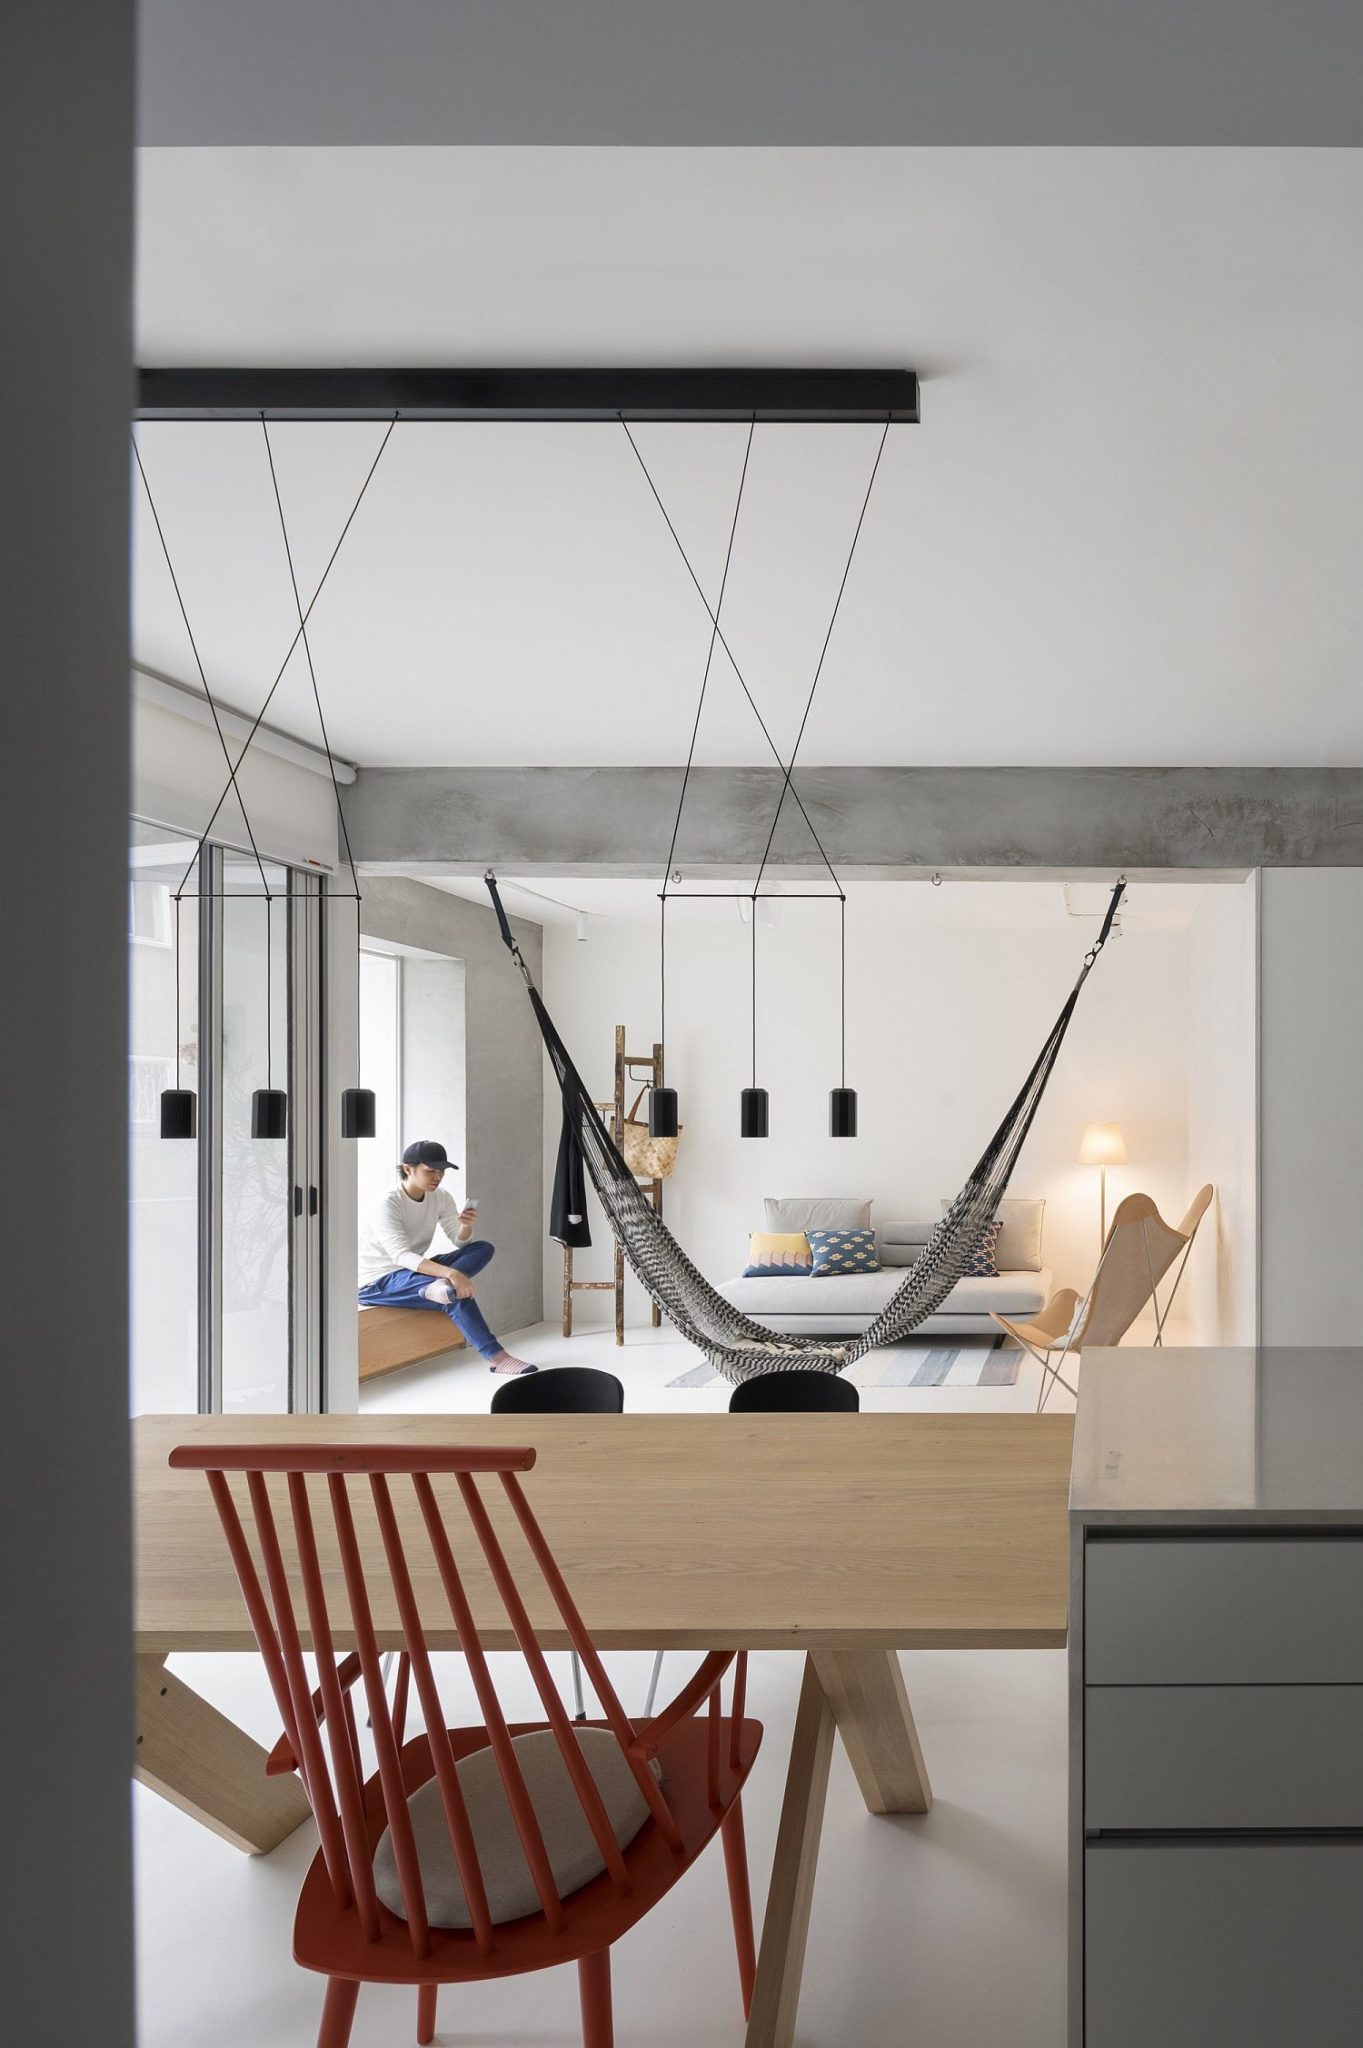 Dark-pendants-add-contrast-and-sculptural-style-to-the-interior